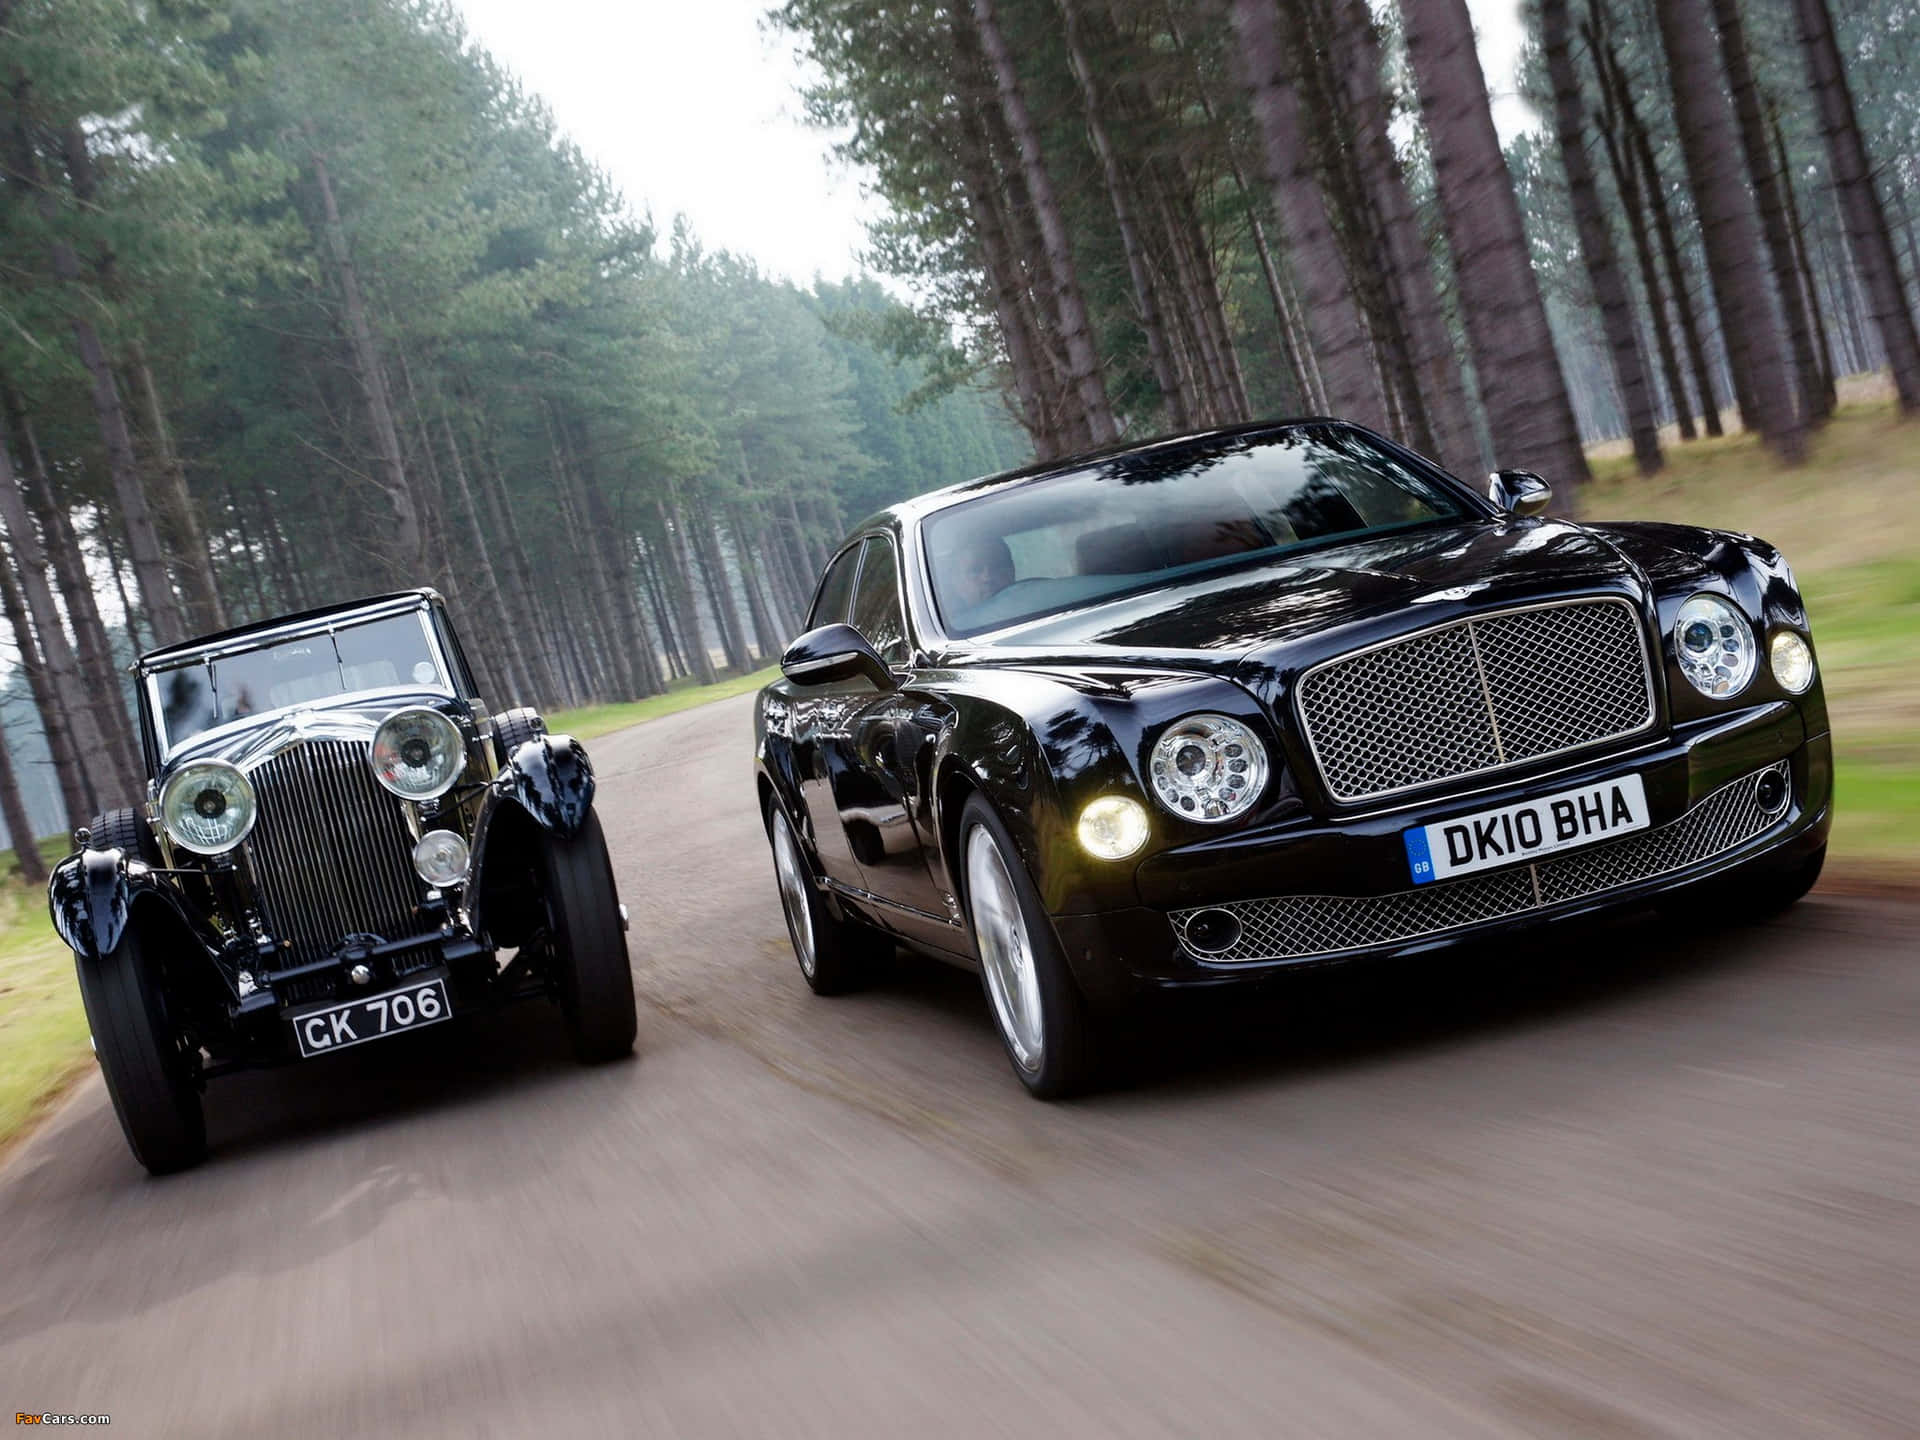 "Classic Luxury - This vintage Old Bentley Roadster will never go out of fashion" Wallpaper